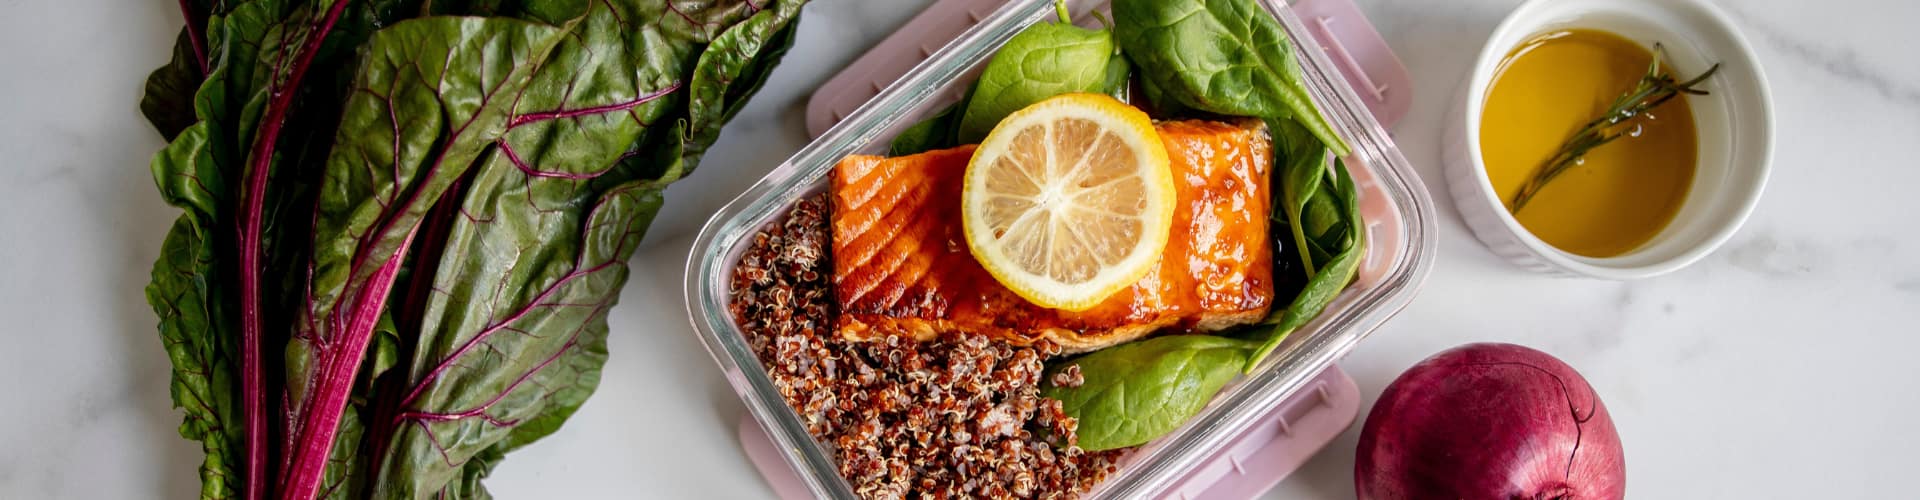 Meal Prepping for the Health & Wellness-Minded